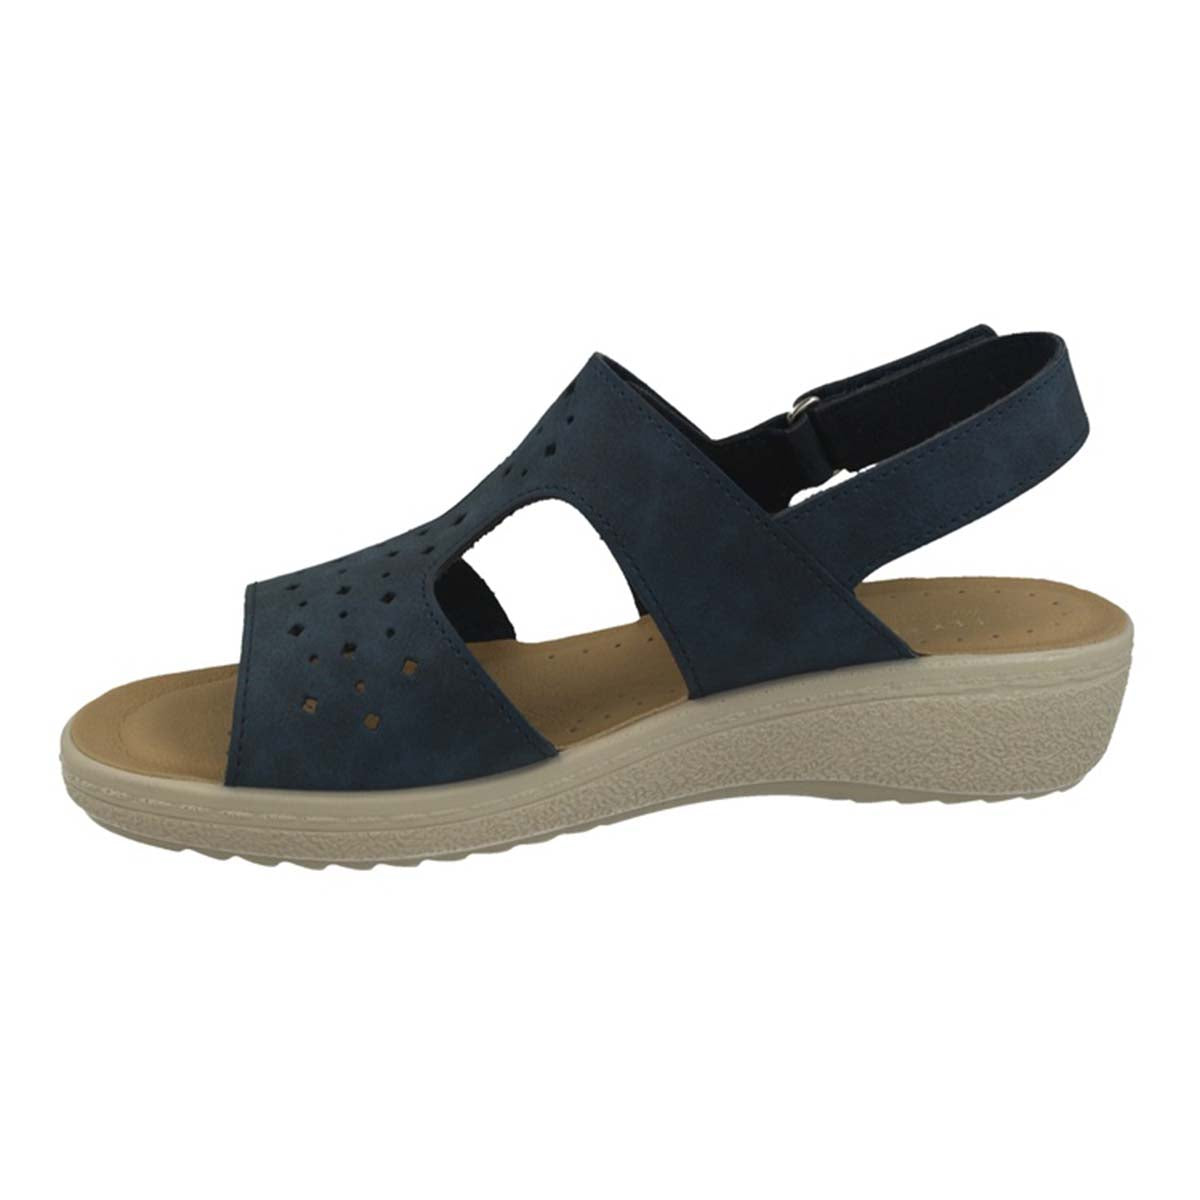 See the Velcro Back Strap Faux Leather Women Sandals in the colour BEIGE, available in various sizes